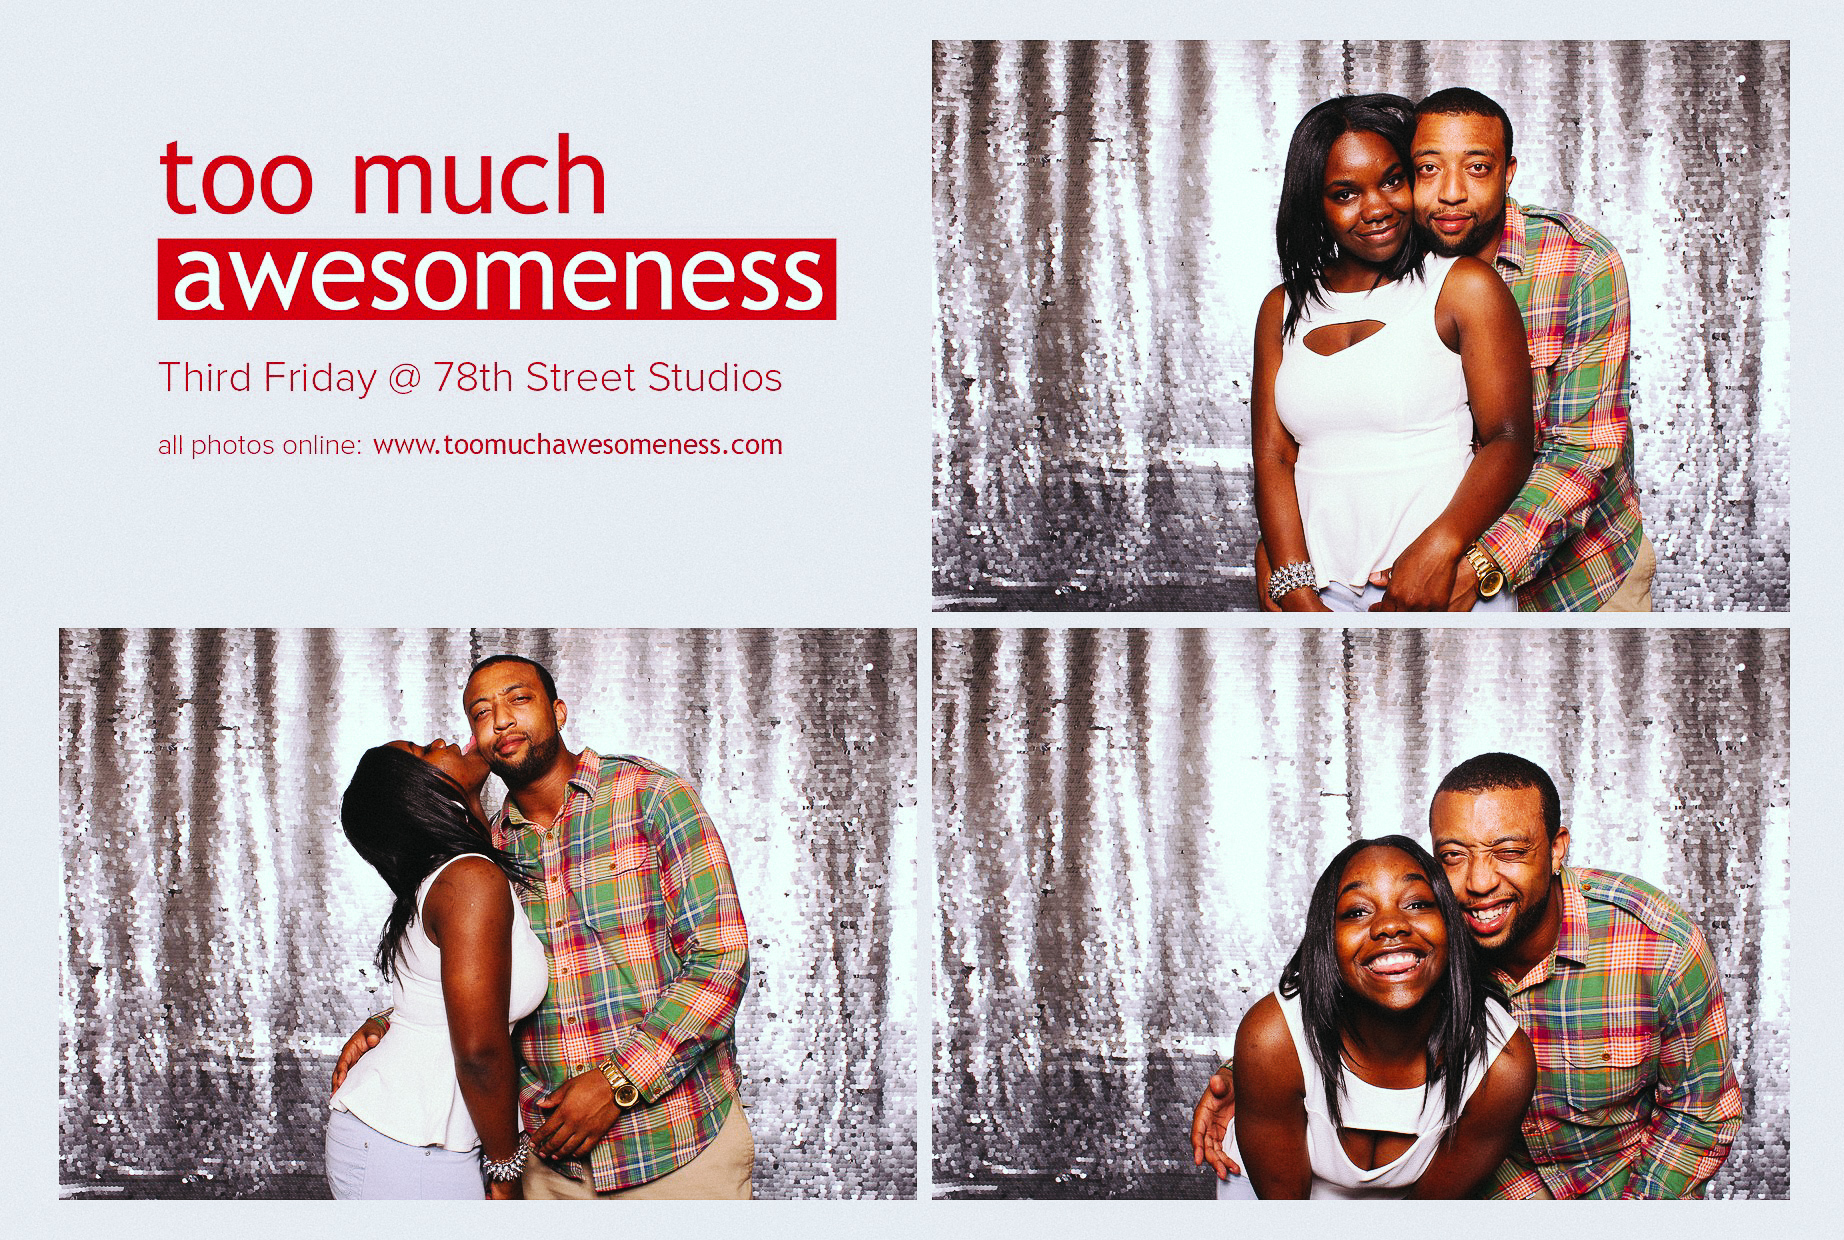 00100-78th Street Studios Third Friday Photobooth by Too Much Awesomeness-20140620.jpg